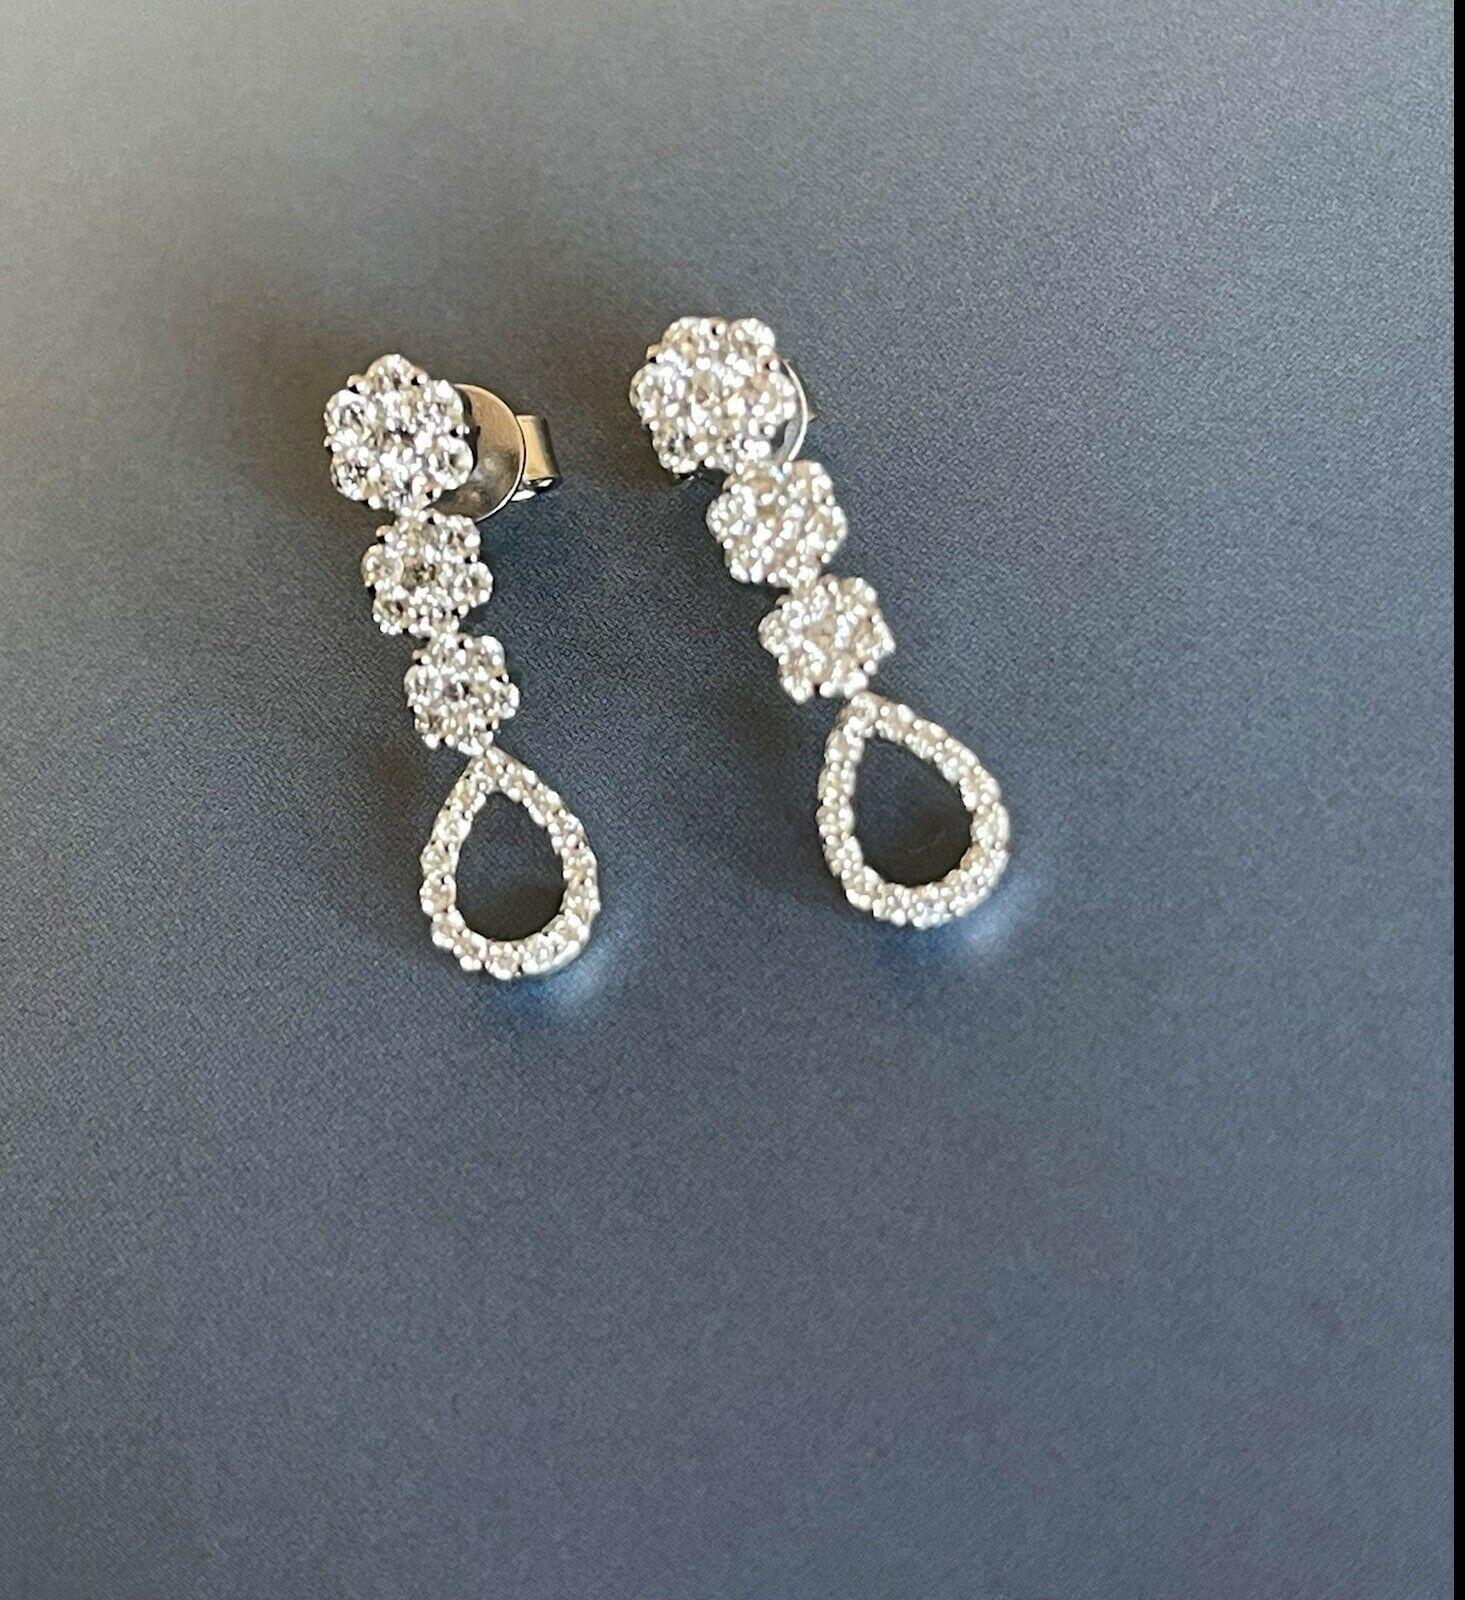 18ct White Gold Diamond Earrings 1.20ct Daisy Drop Cocktail Bridal One Carat In New Condition For Sale In Ilford, GB